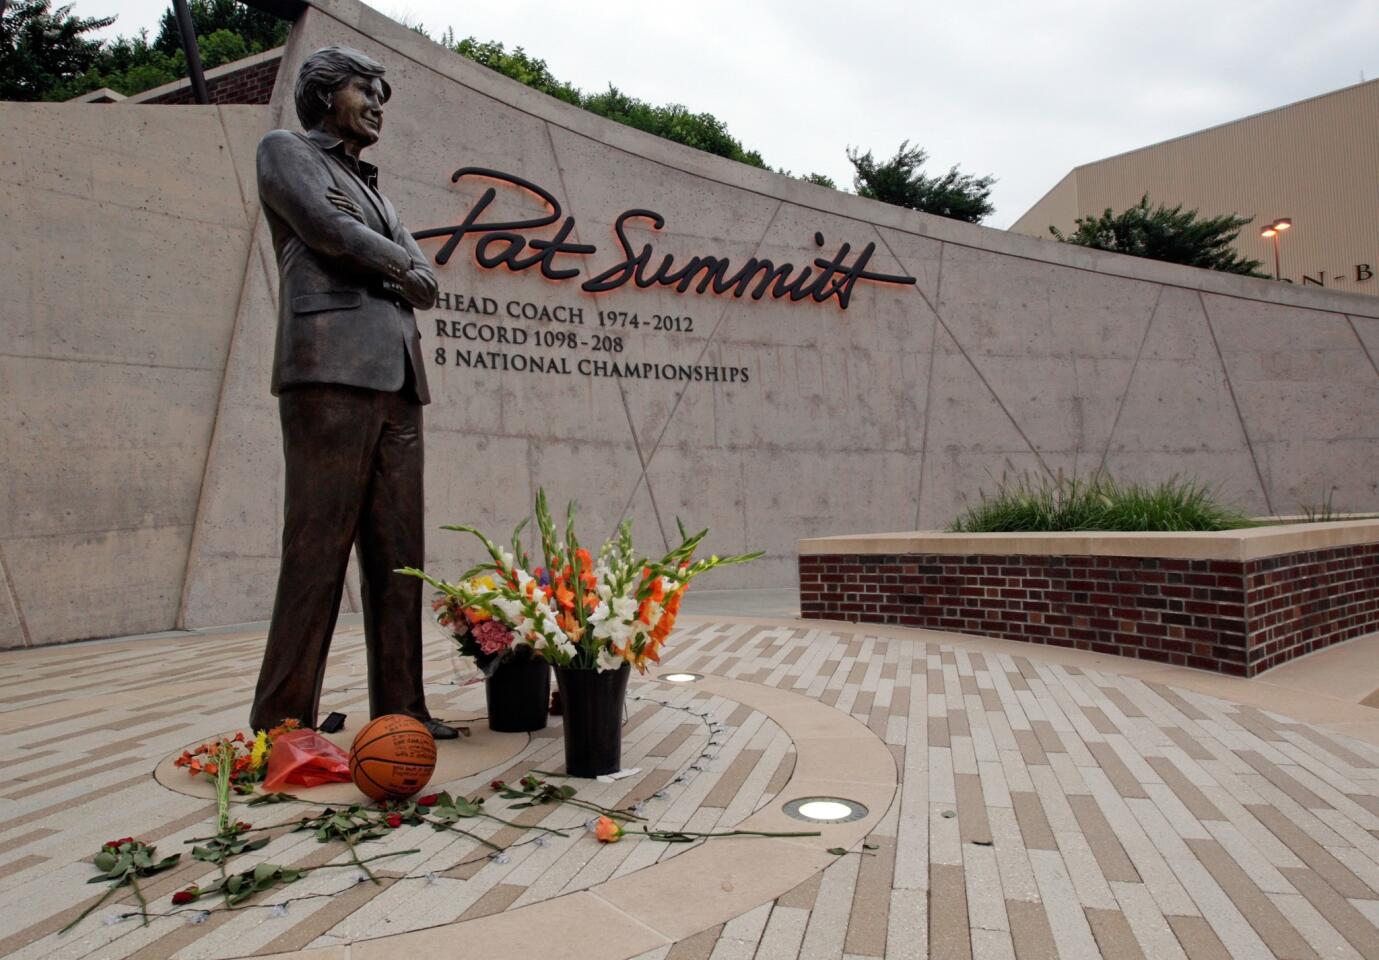 Flowers lay alongside a memorial basketball fans have left at the Pat Summitt statue Tuesday, June 28, 2016, in Knoxville, Tenn.